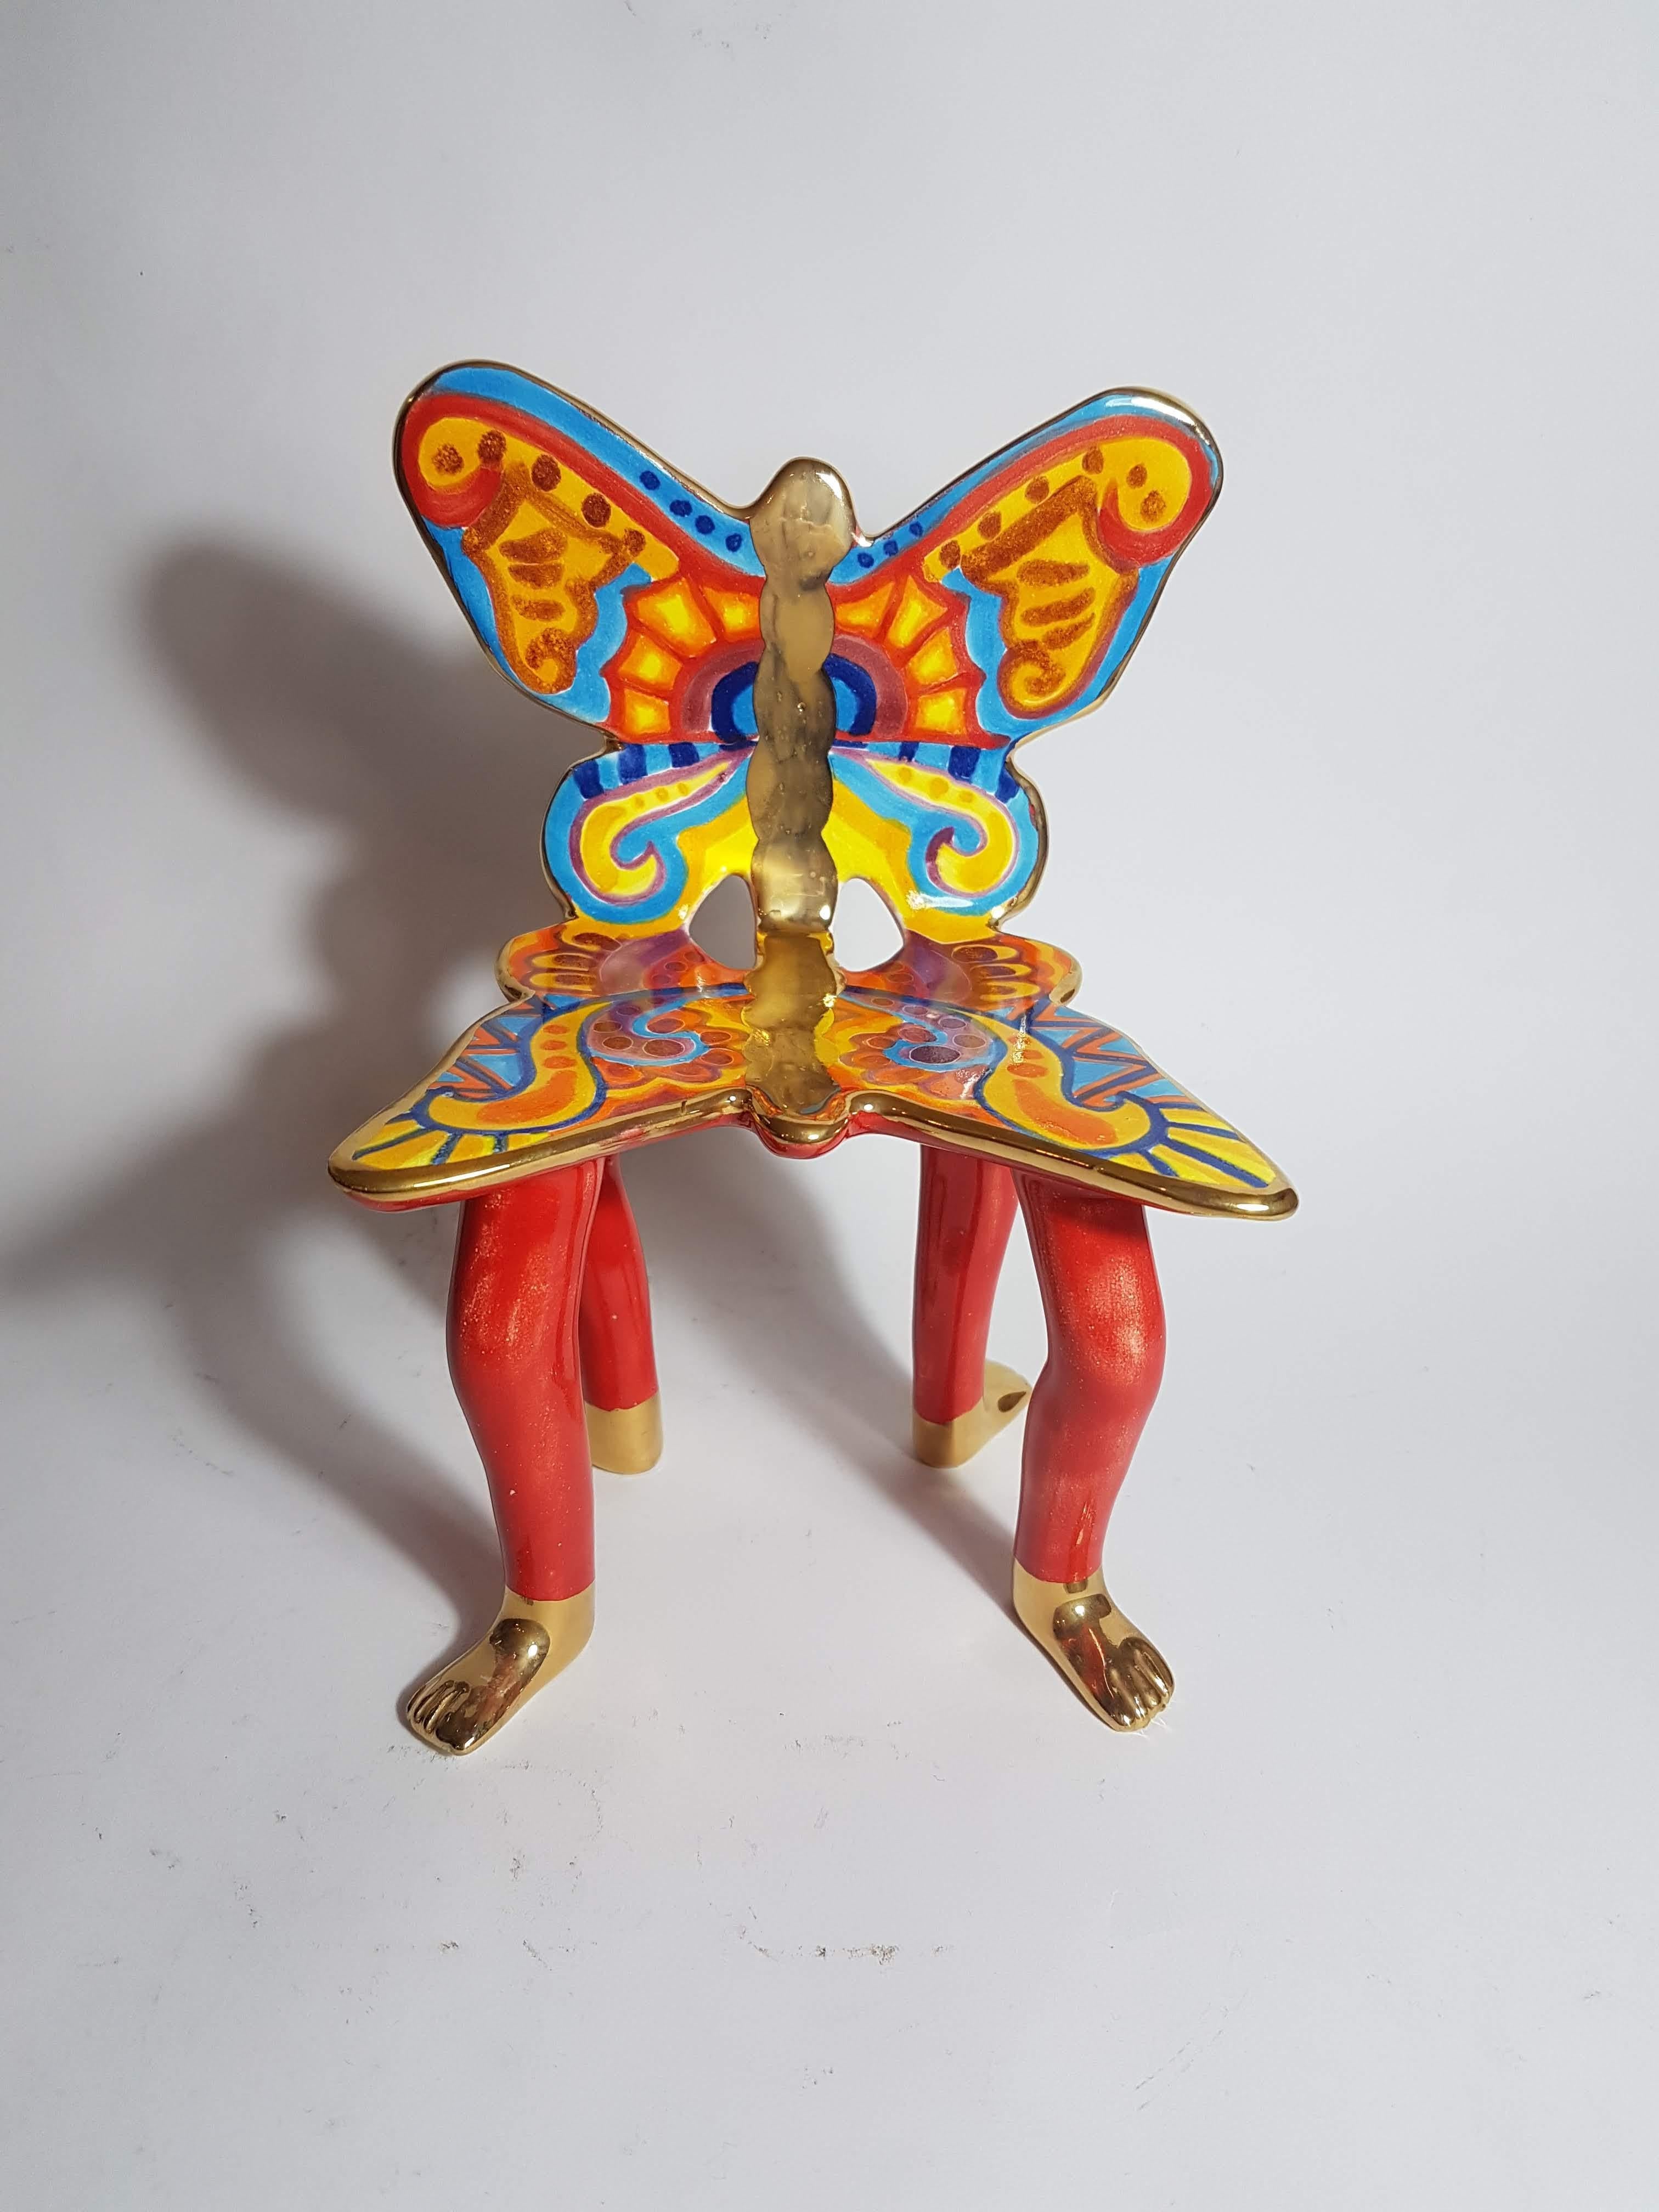 Beautiful unique ceramic butterfly chair sculpture by Pedro Friedeberg. Signed.

Pedro Friedeberg is a Mexican artist and designer known by his surrealist work filled with lines and colors, as well as ancient and religious symbols. His best known